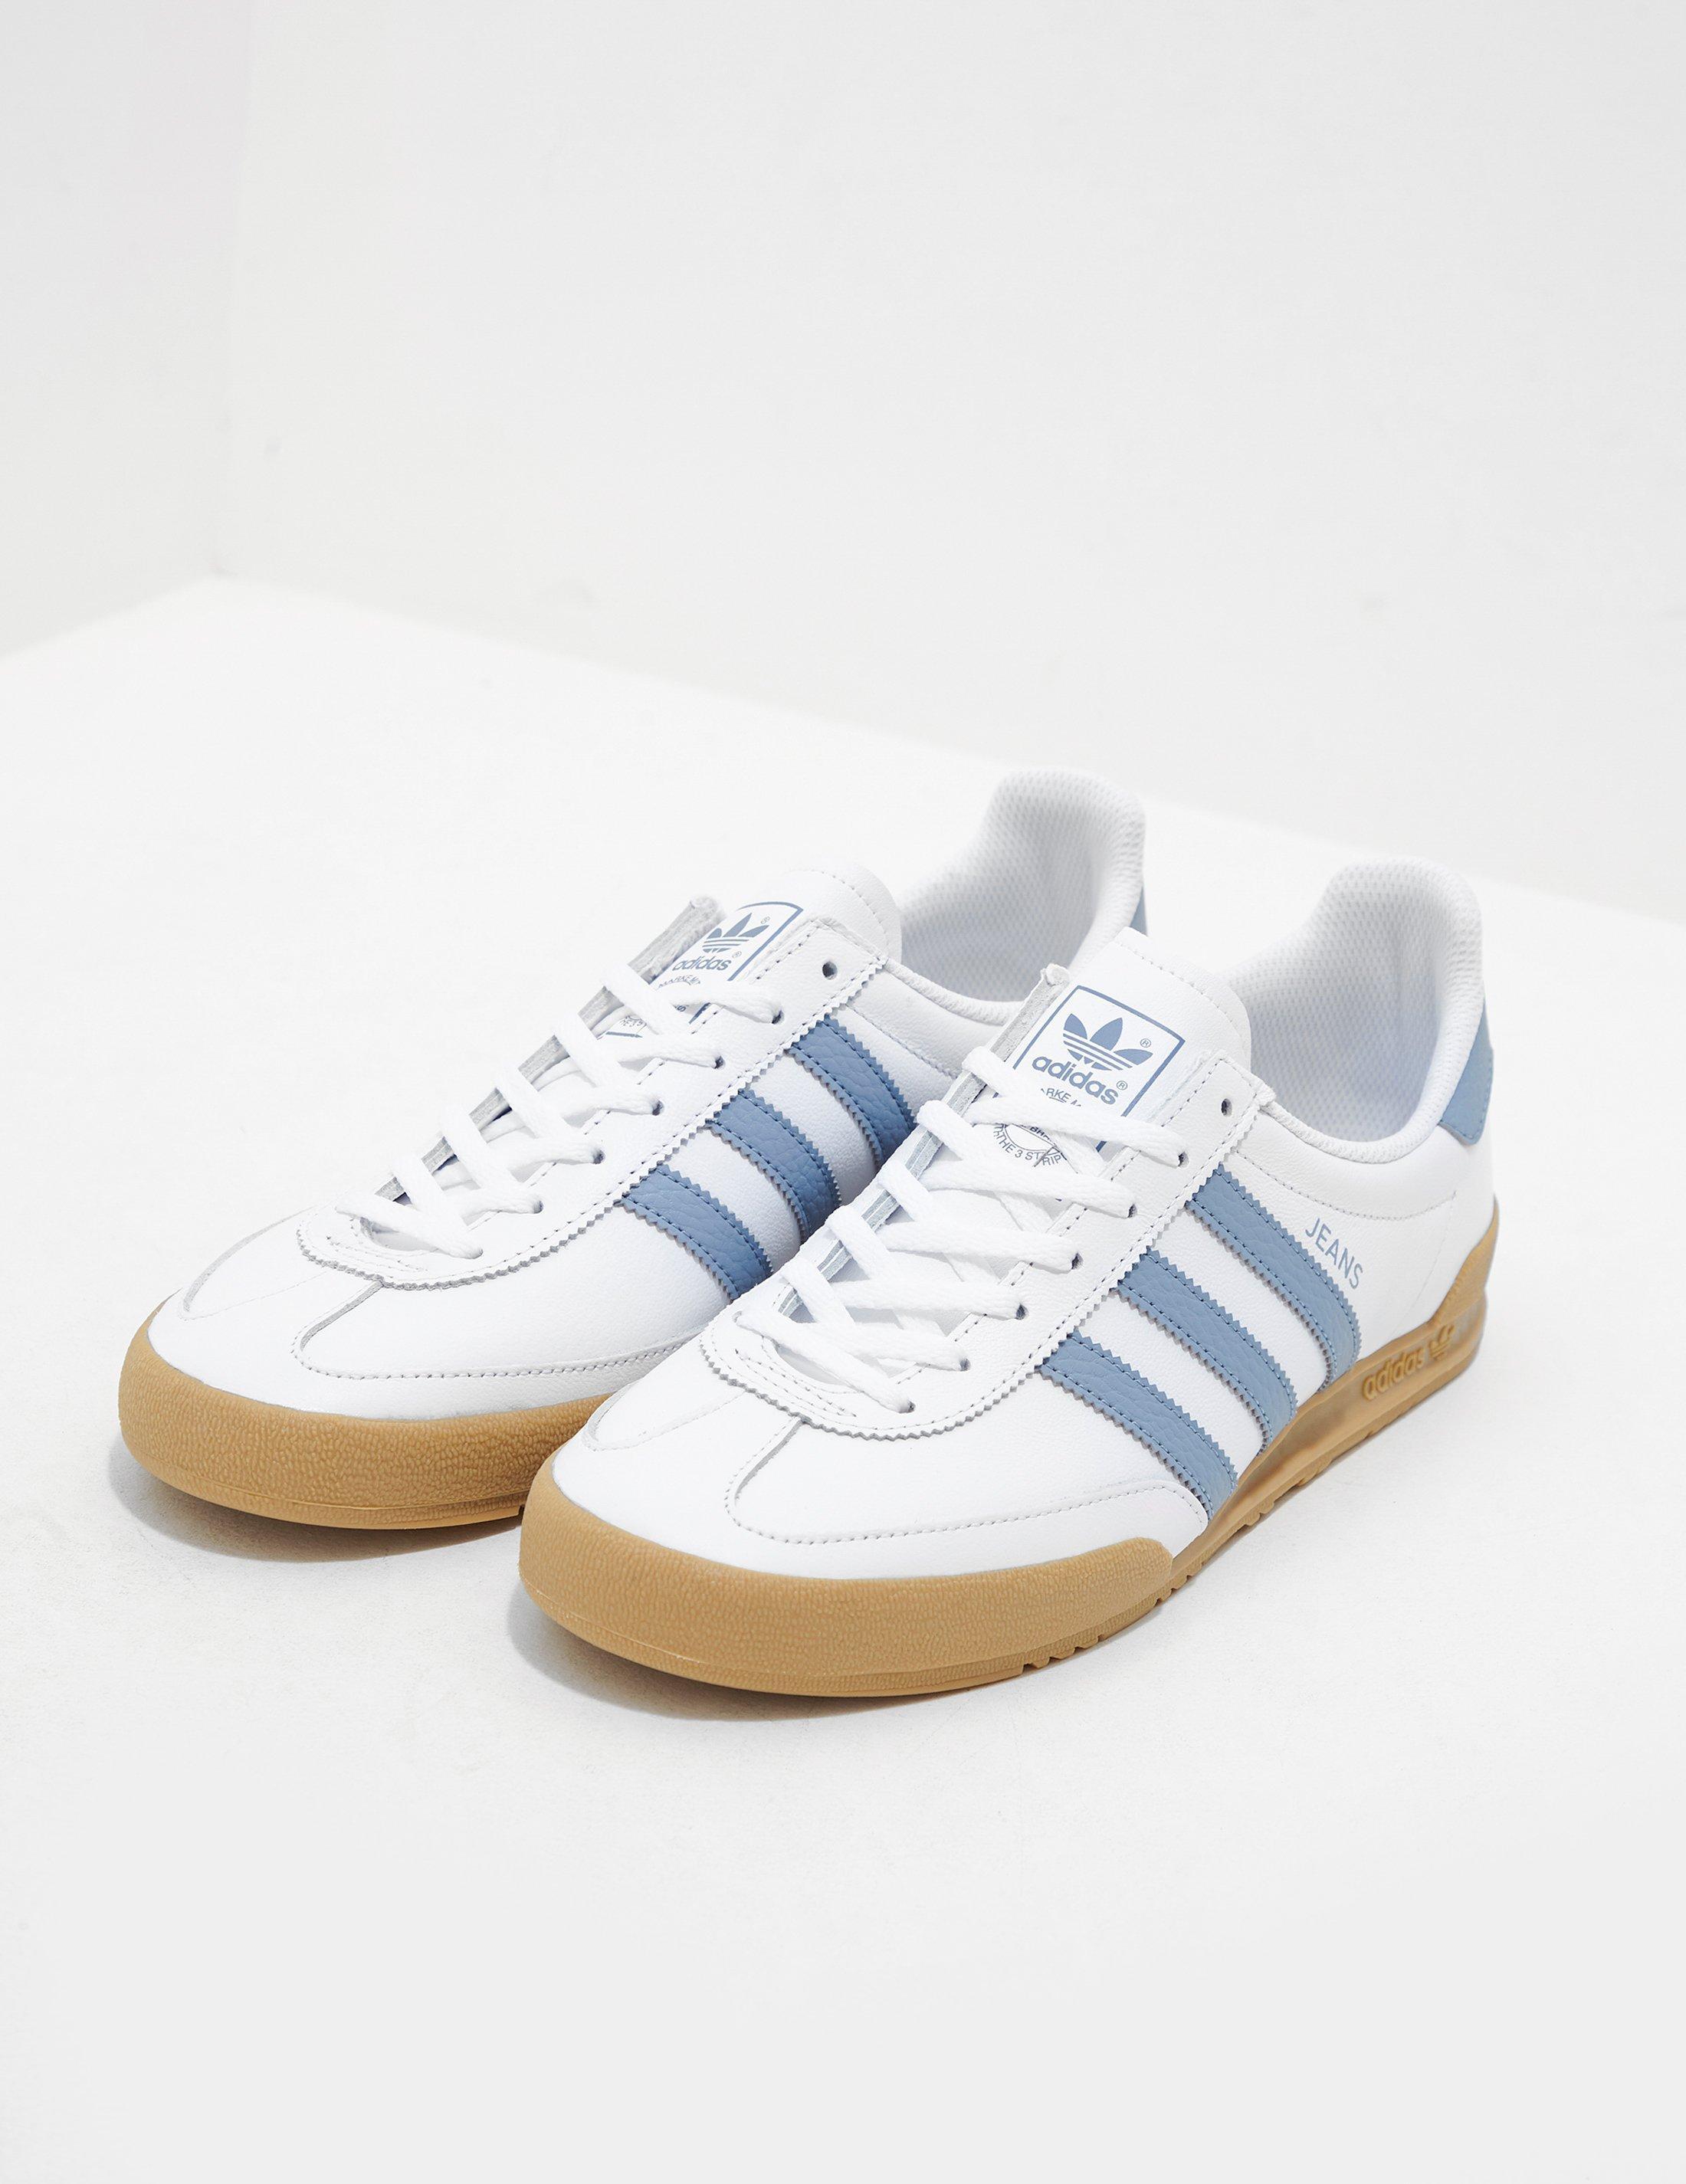 adidas Originals Denim Jeans Leather - Exclusively To Tessuti White for Men  - Lyst